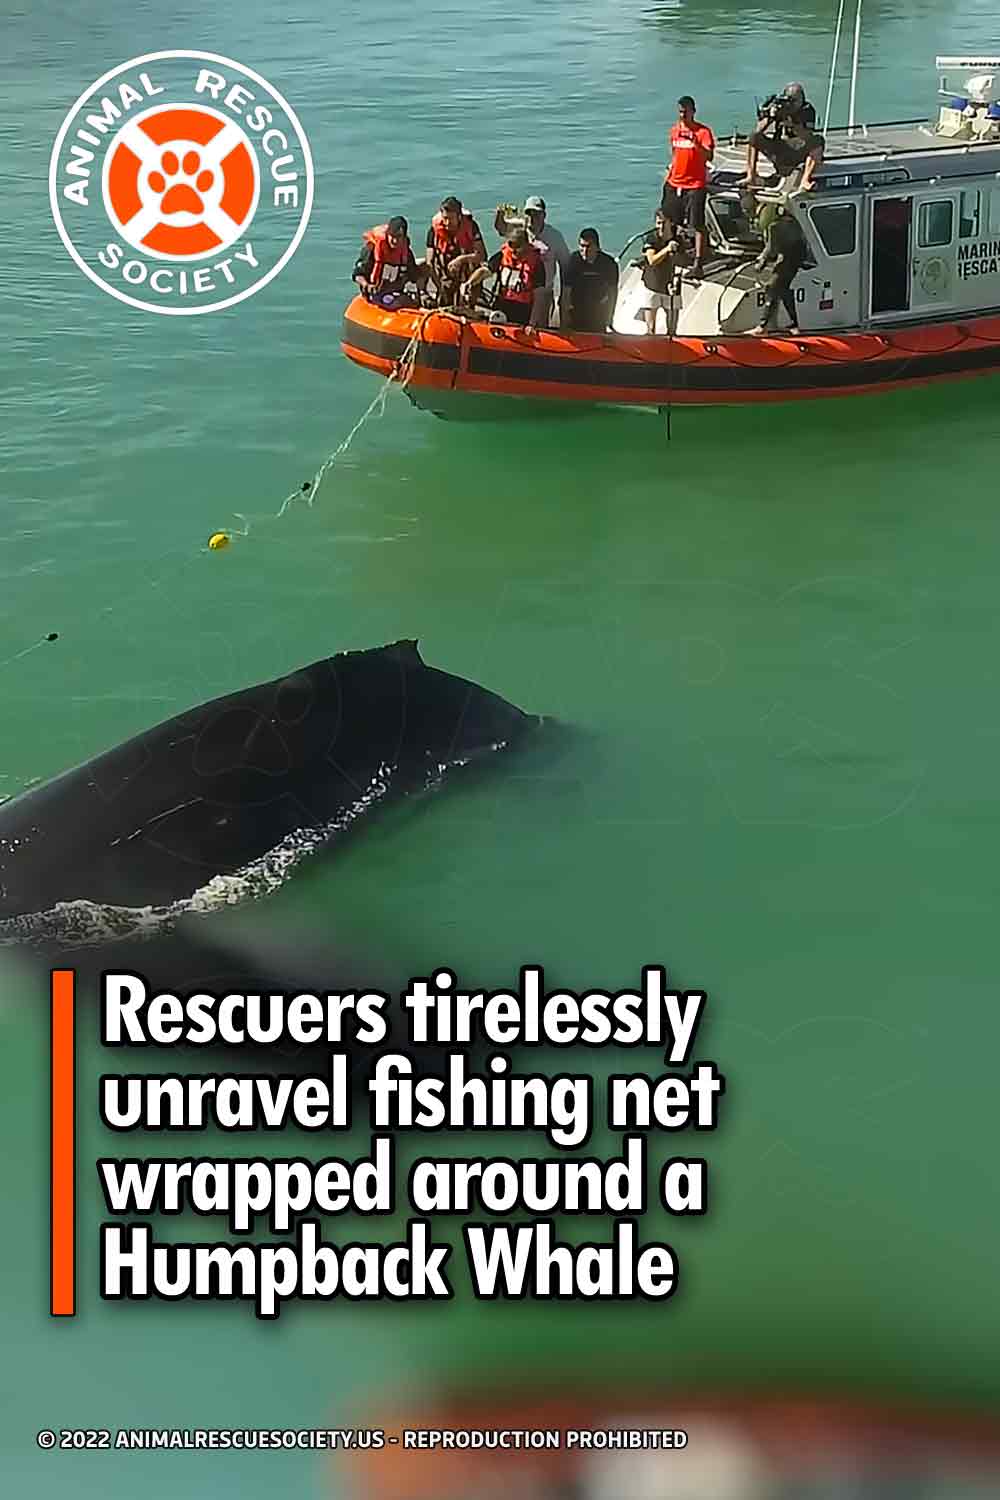 Rescuers tirelessly unravel fishing net wrapped around a Humpback Whale